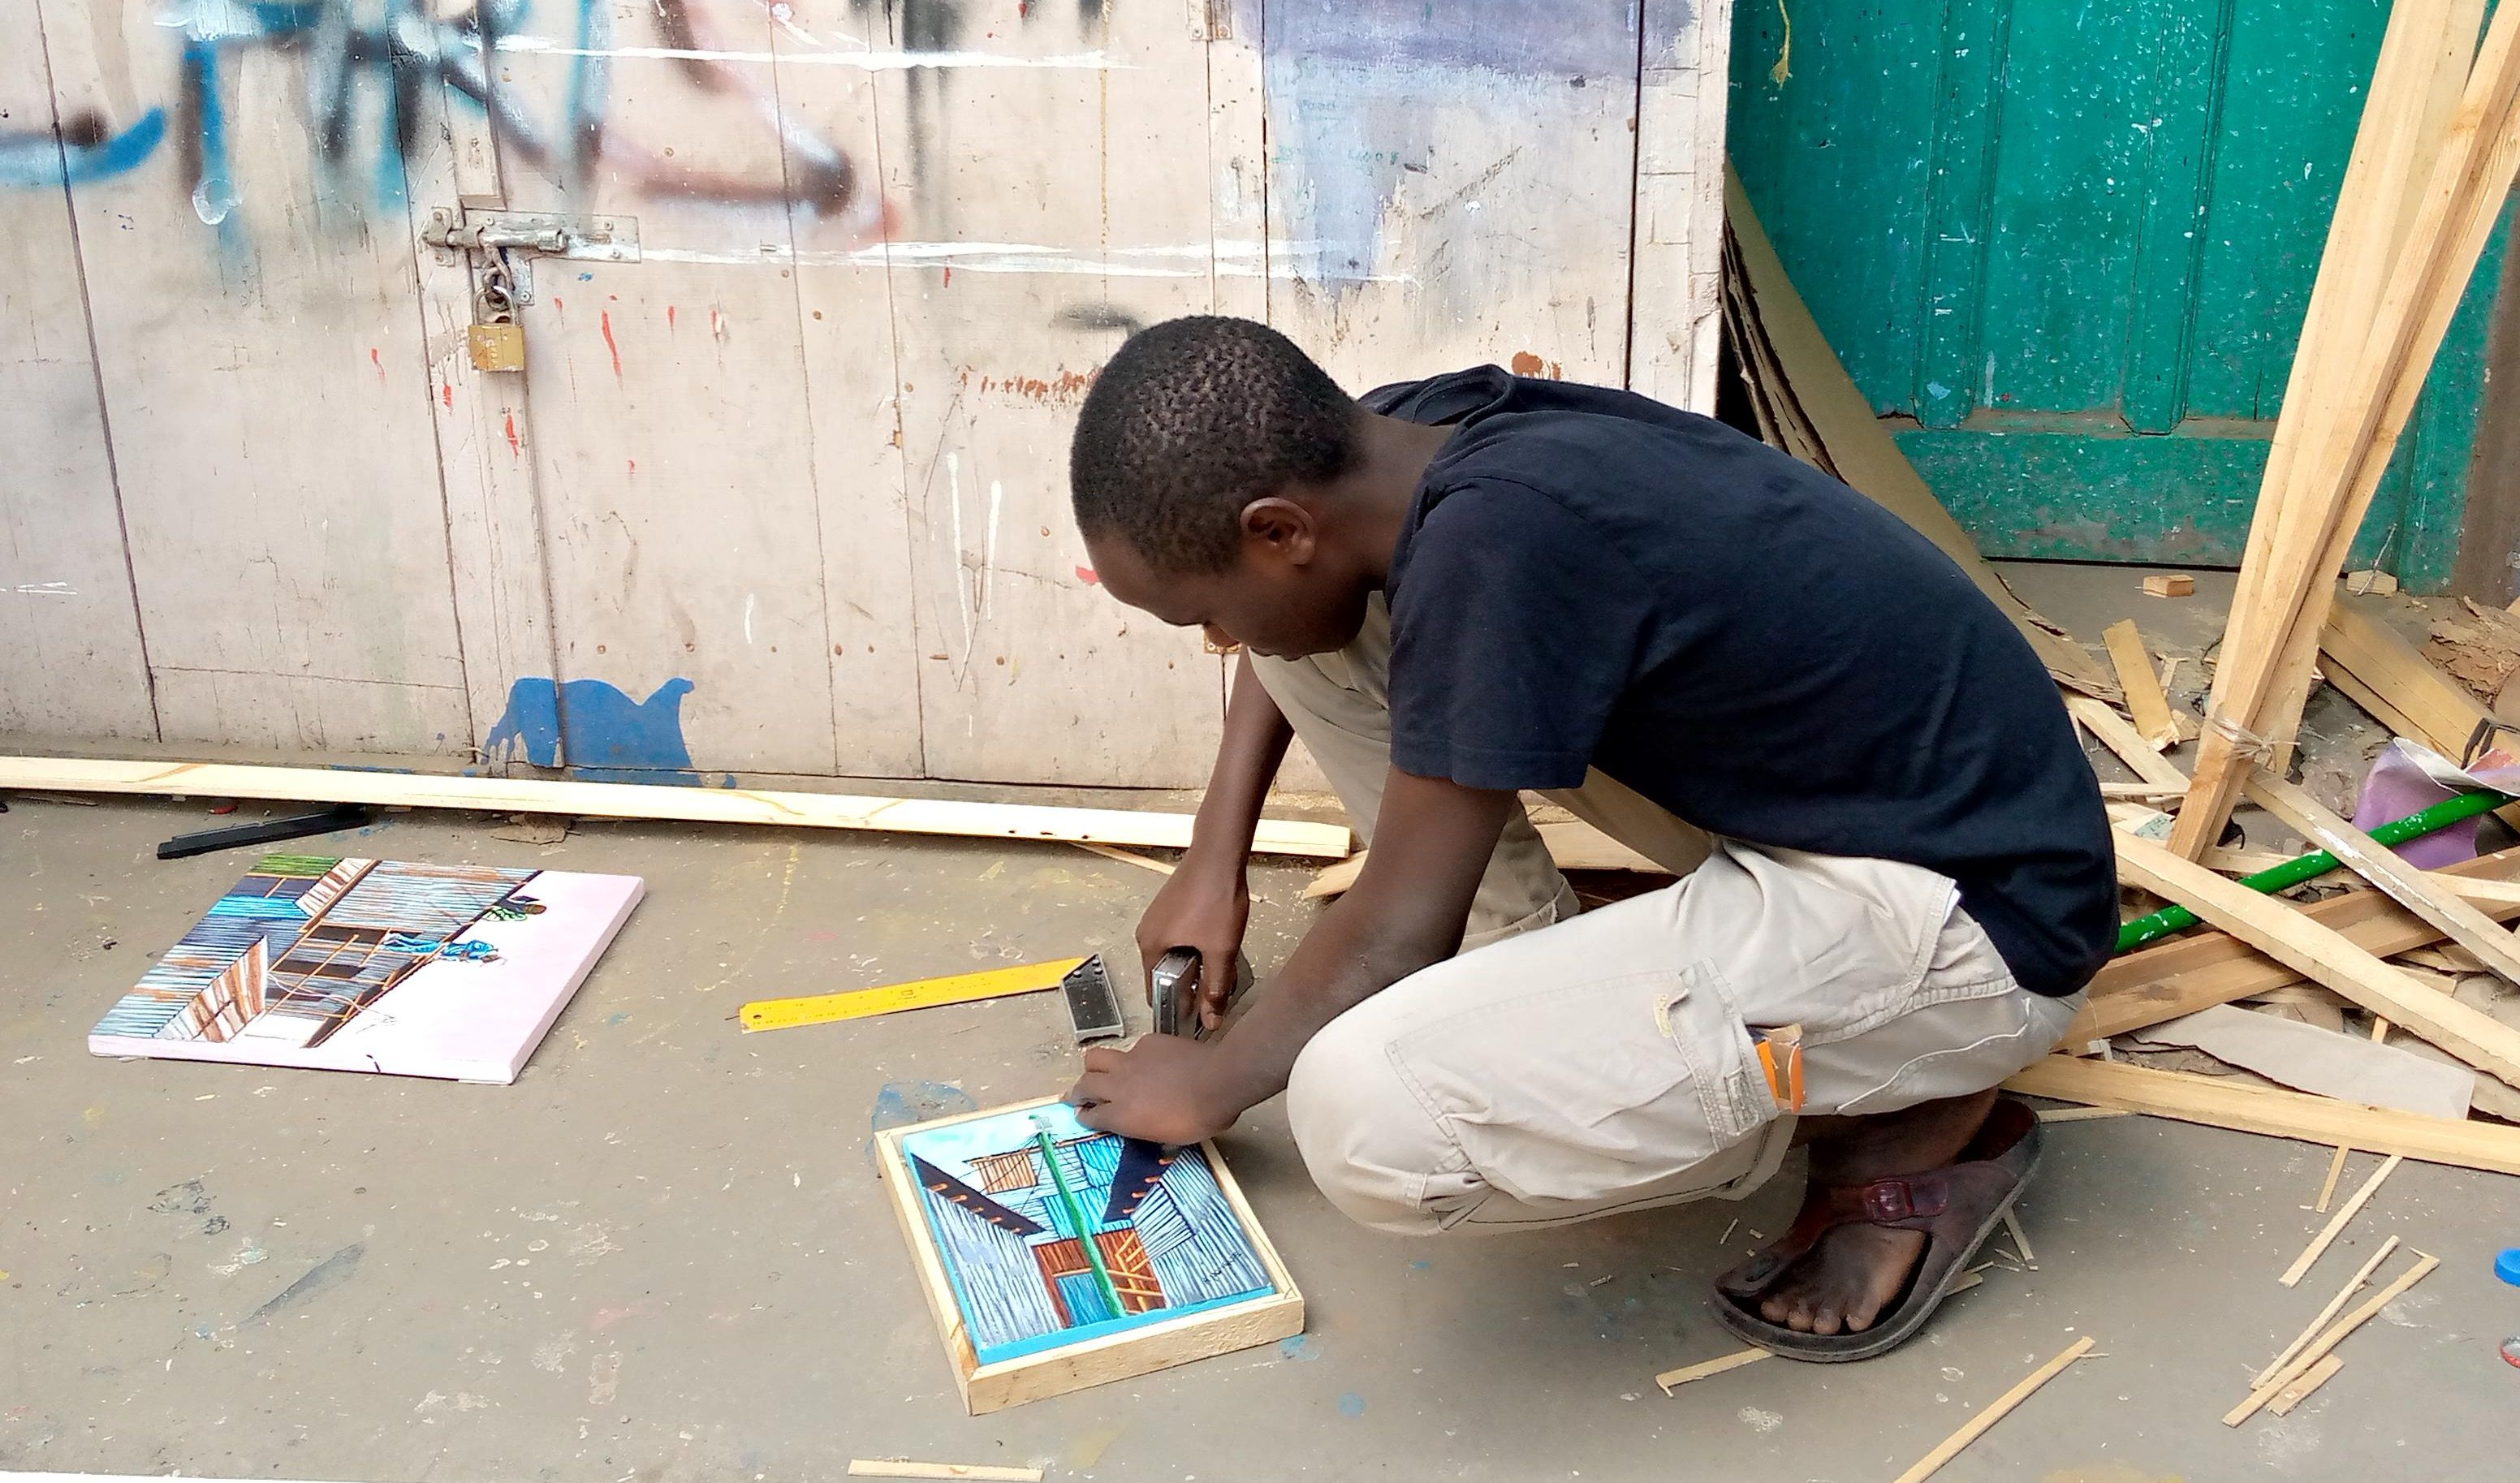 A young man working on a painting